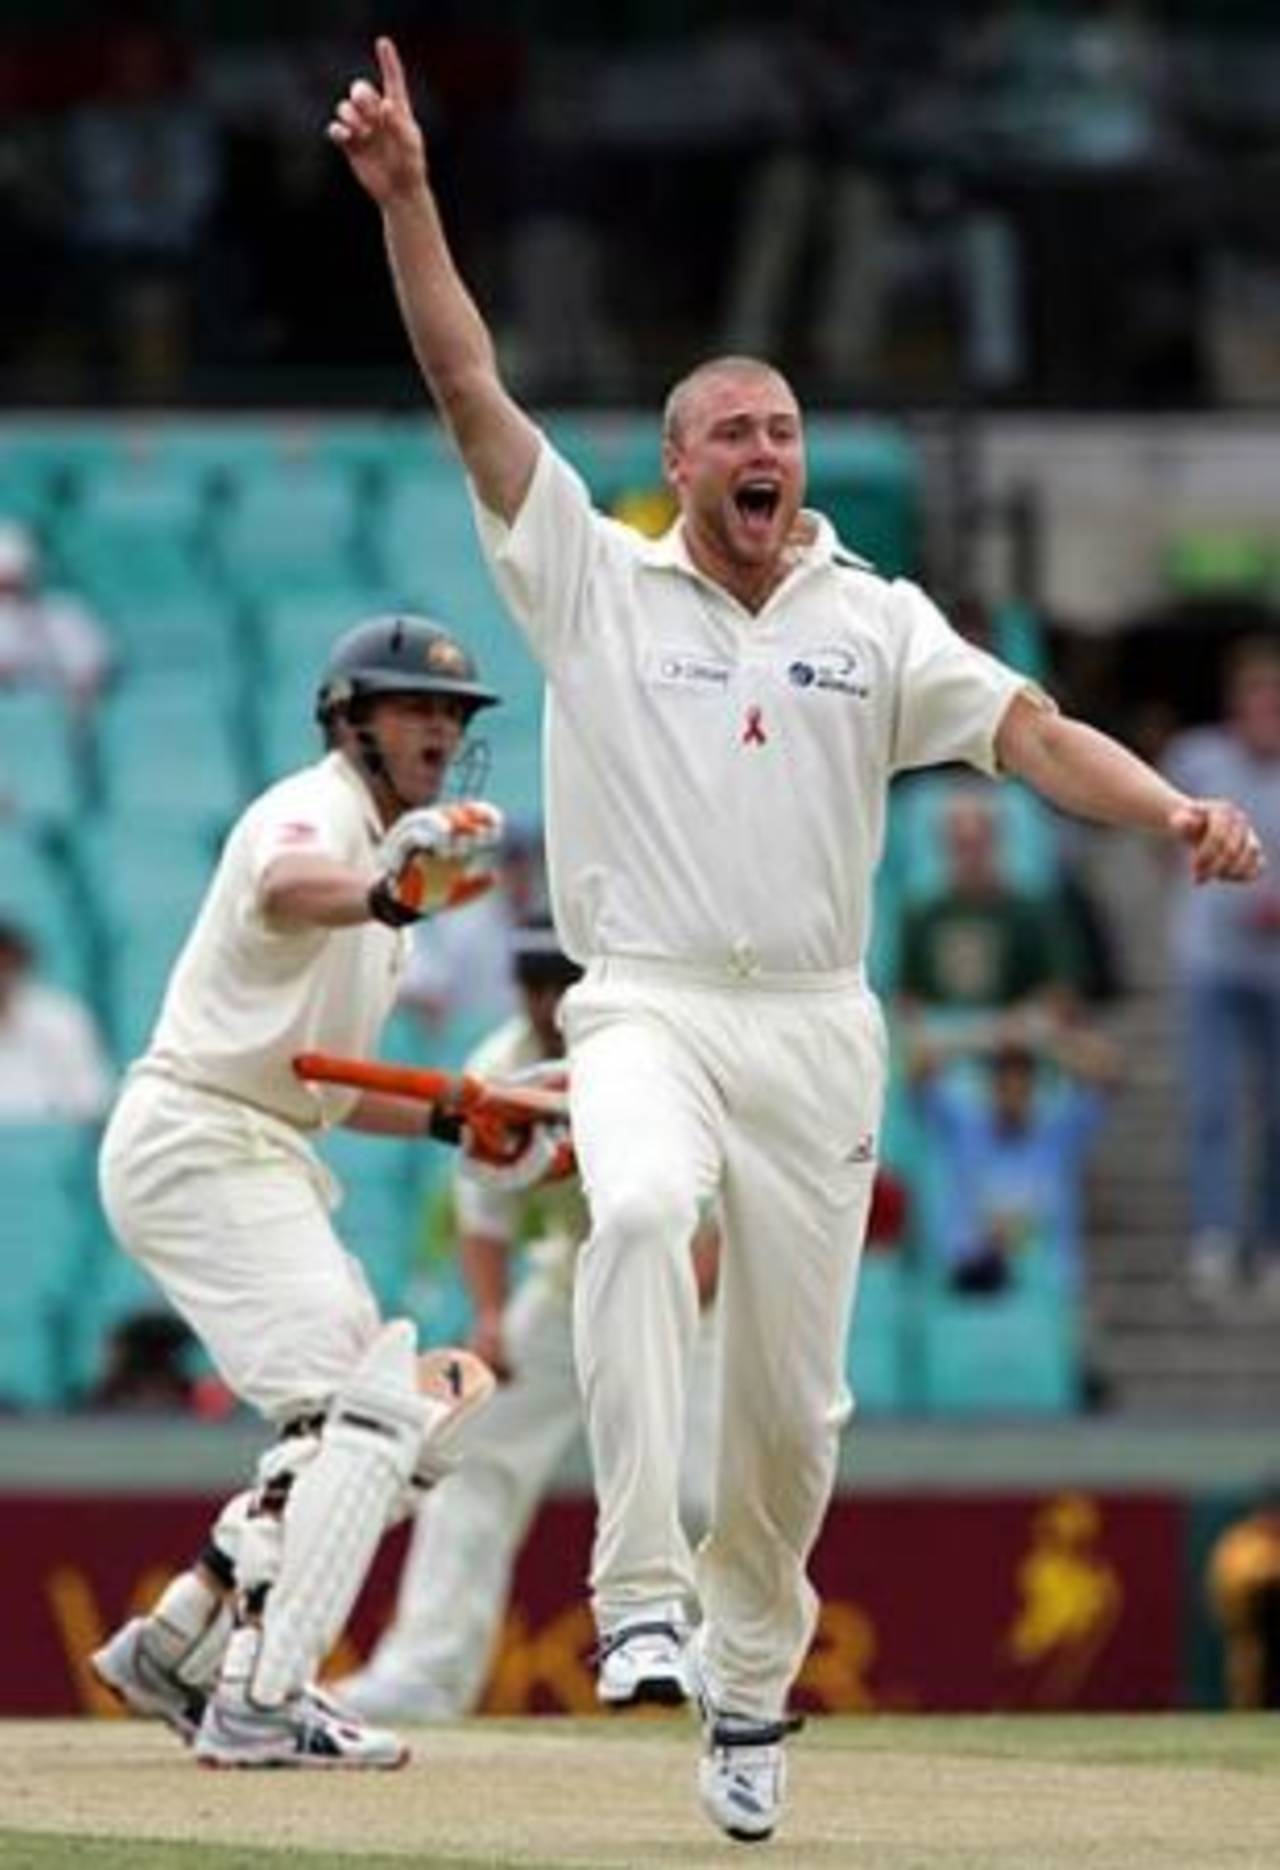 Andrew Flintoff appeals successfully for a lbw decision against Adam Gilchrist,  Australia v World XI, Day 2, Sydney Cricket Ground, October 15, 2005